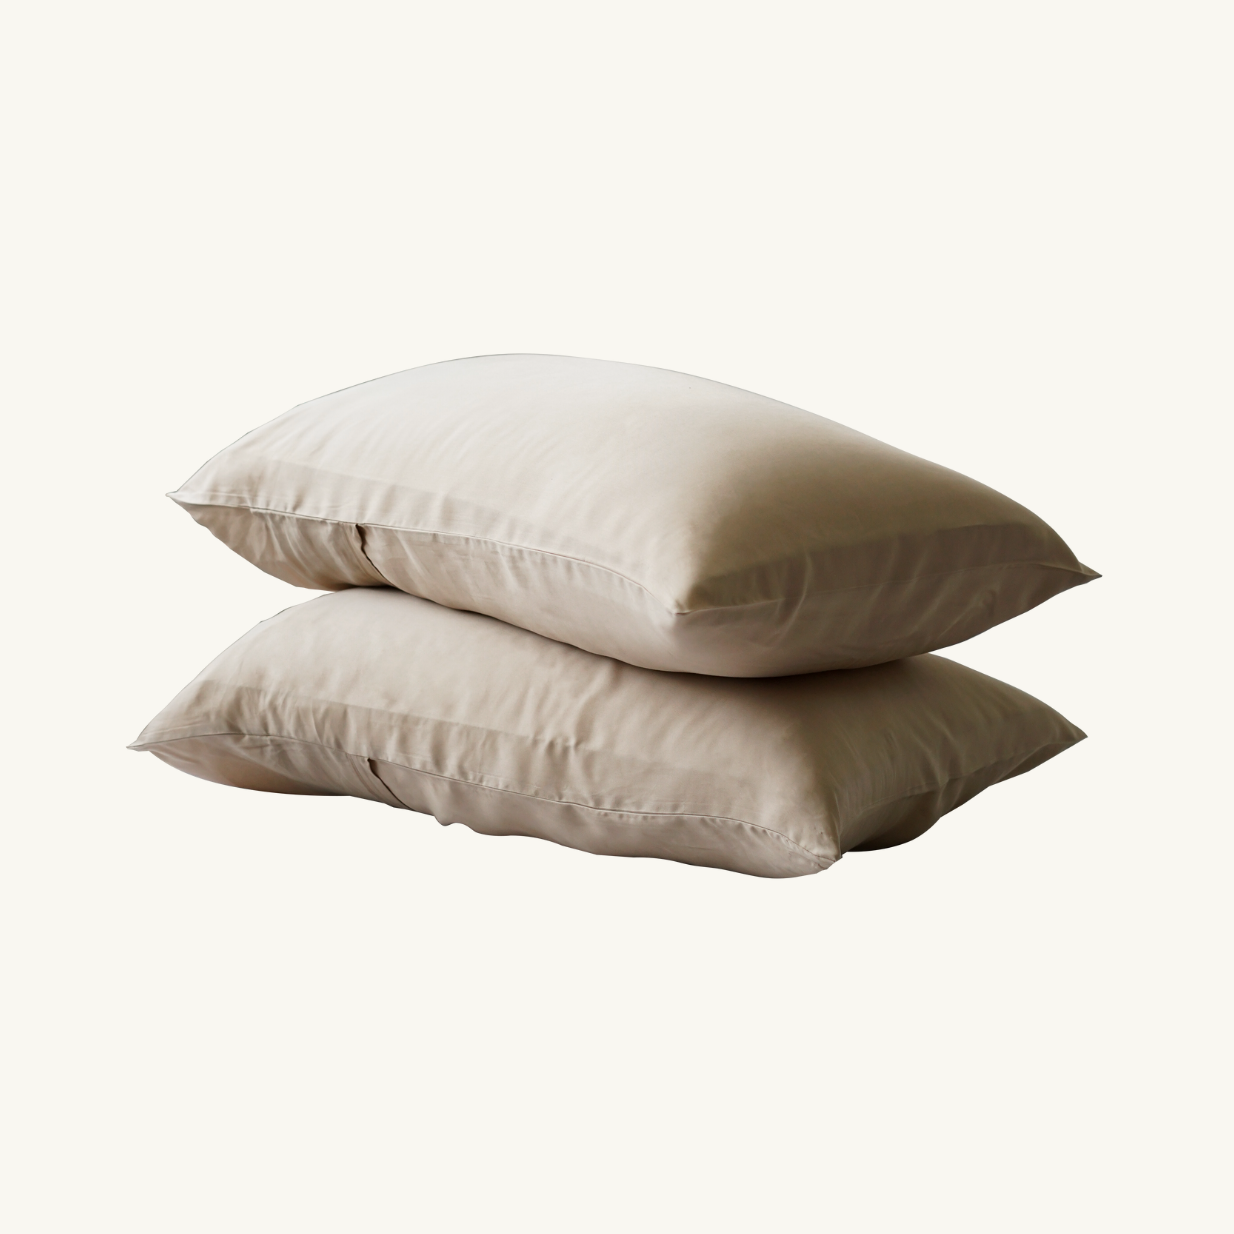 Sand Taupe TENCEL Pillow Case Buy Sand Taupe pillow case Singapore at Weavve Home. Best pillowcase, pillow case, pillow cover Singapore. 